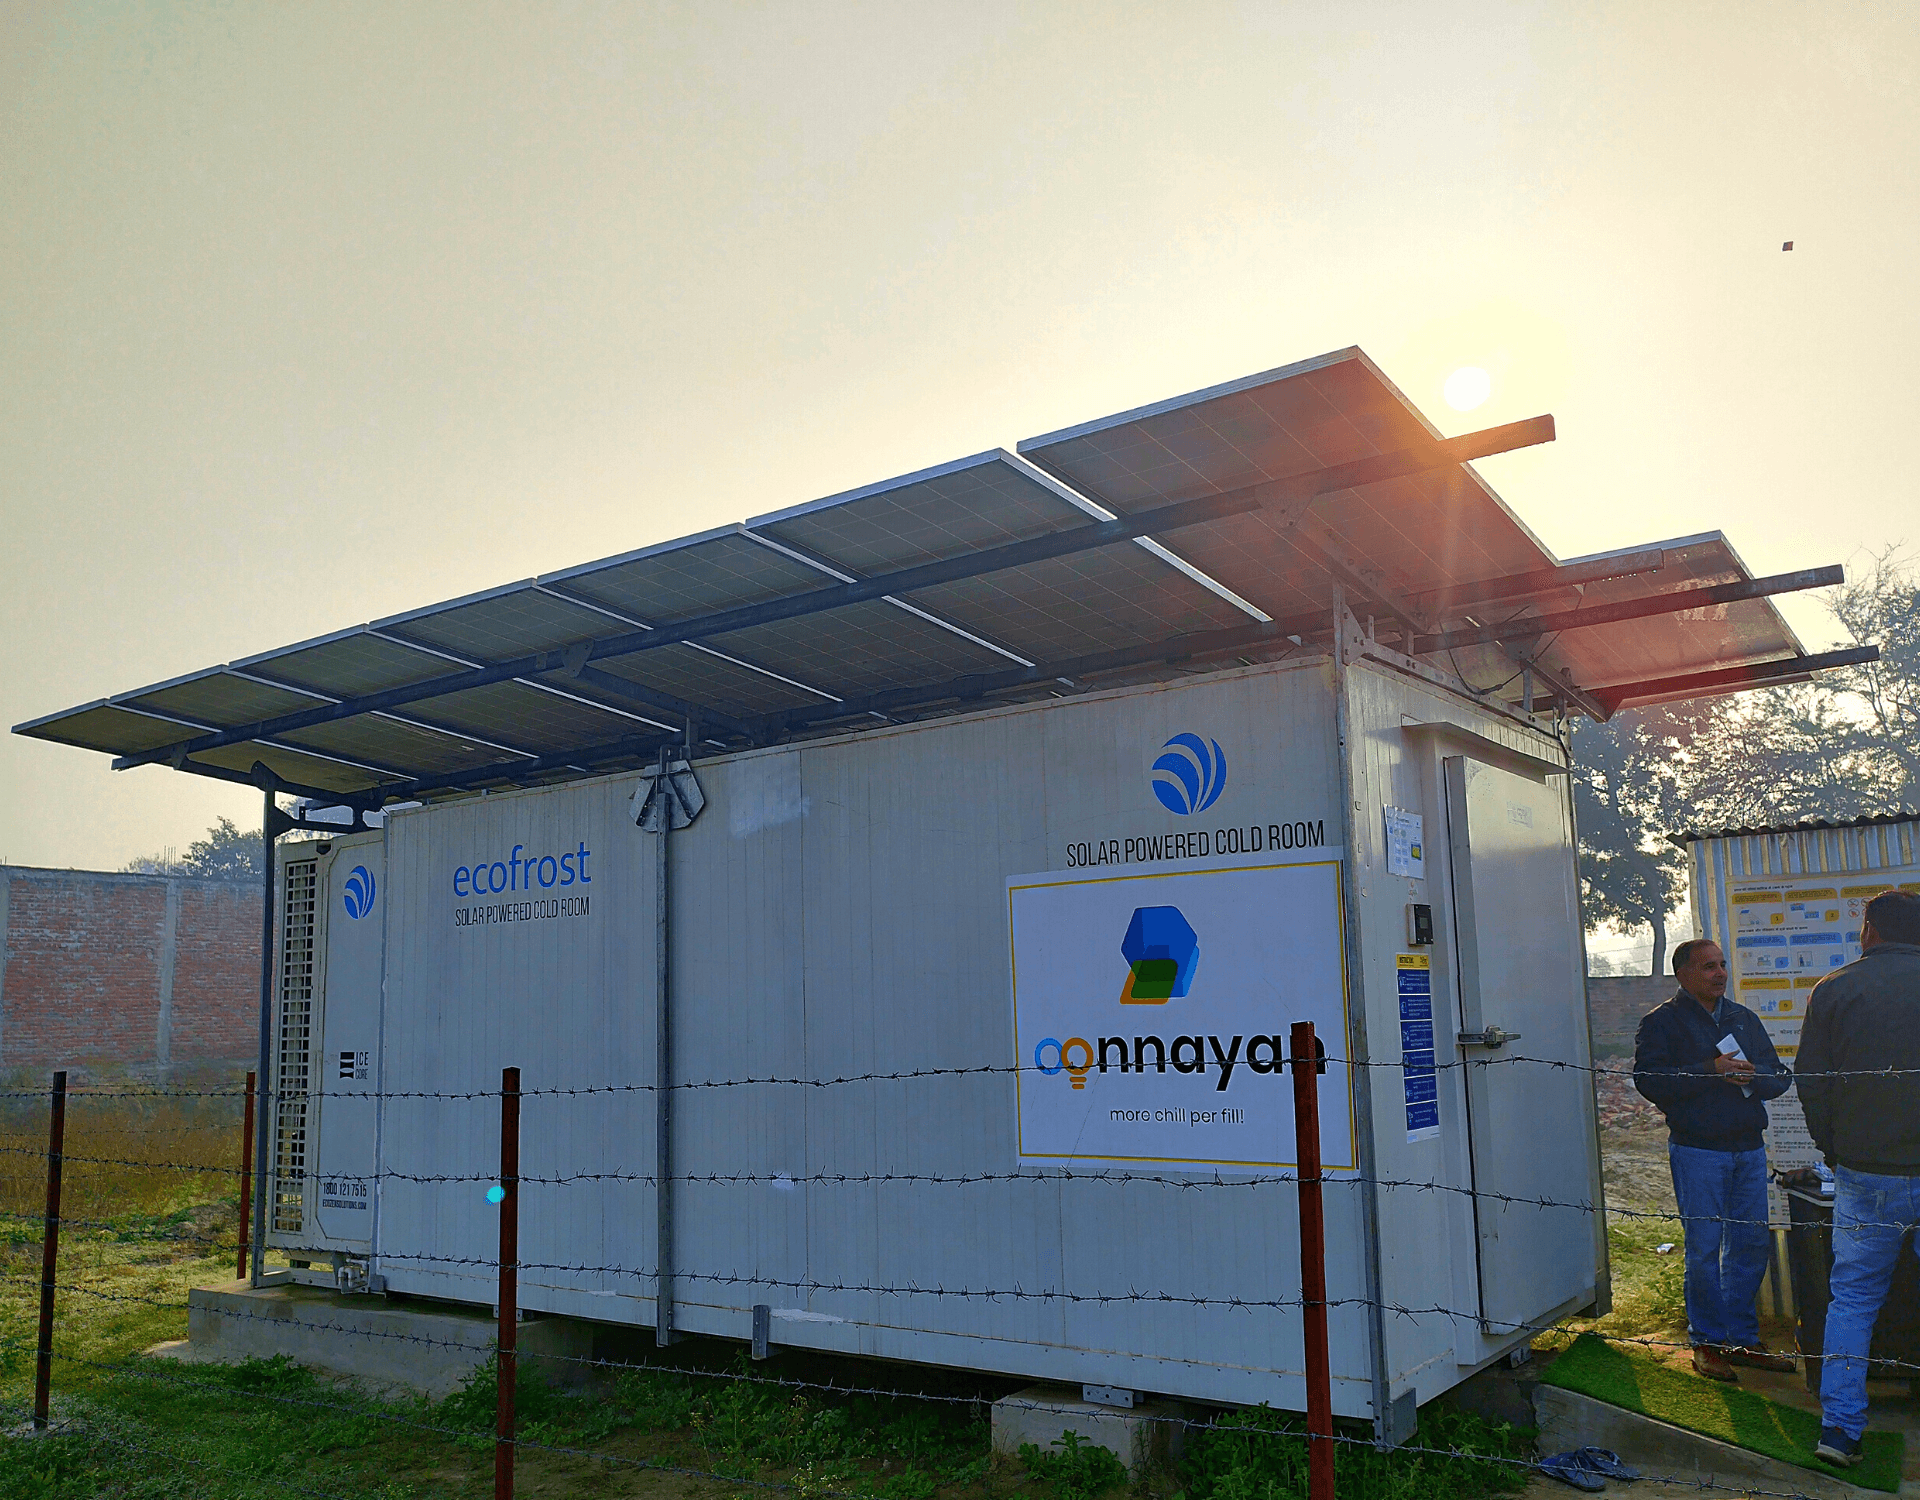 A solar cold storage in Bahraich district, Uttar Pradesh. These 5 MT cold rooms can store 30+ types of perishable produce achieving 400% higher shelf life